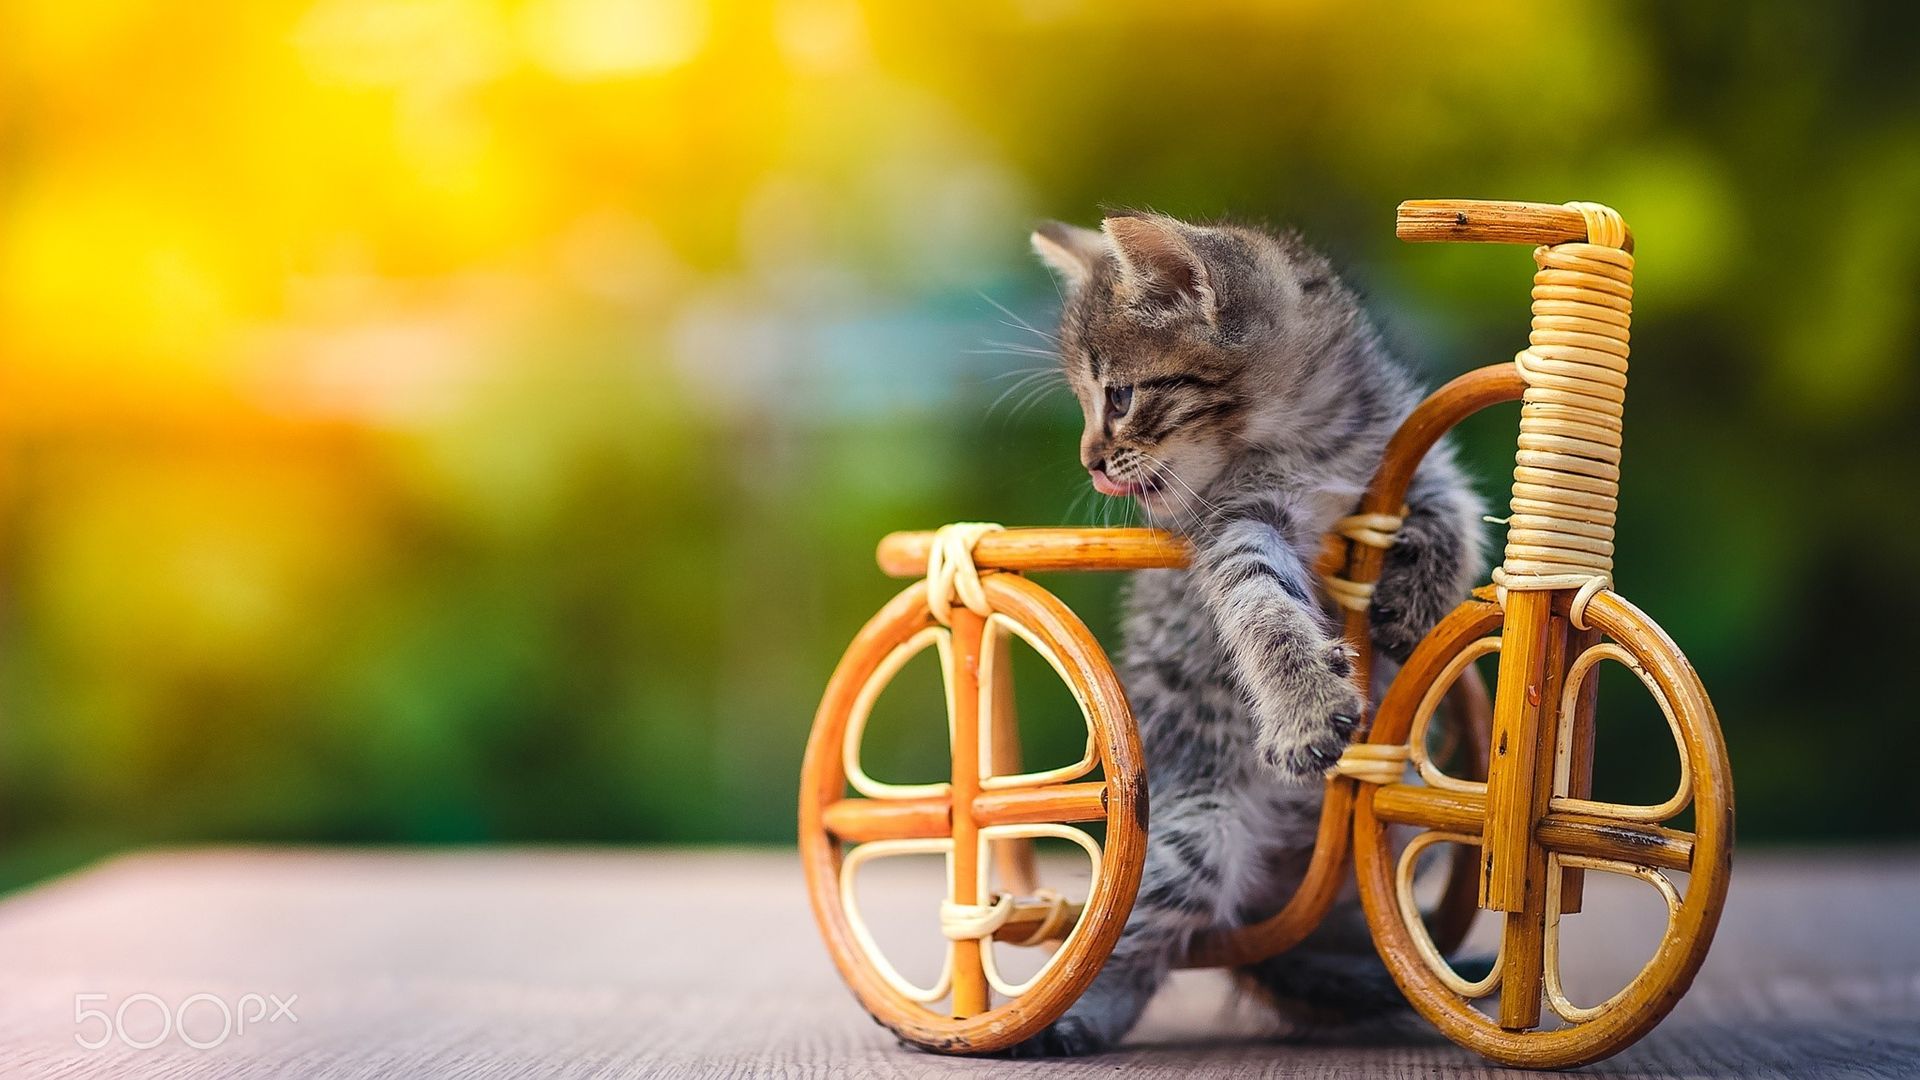 Funny Cat Riding Bicycle Wallpaper Stream